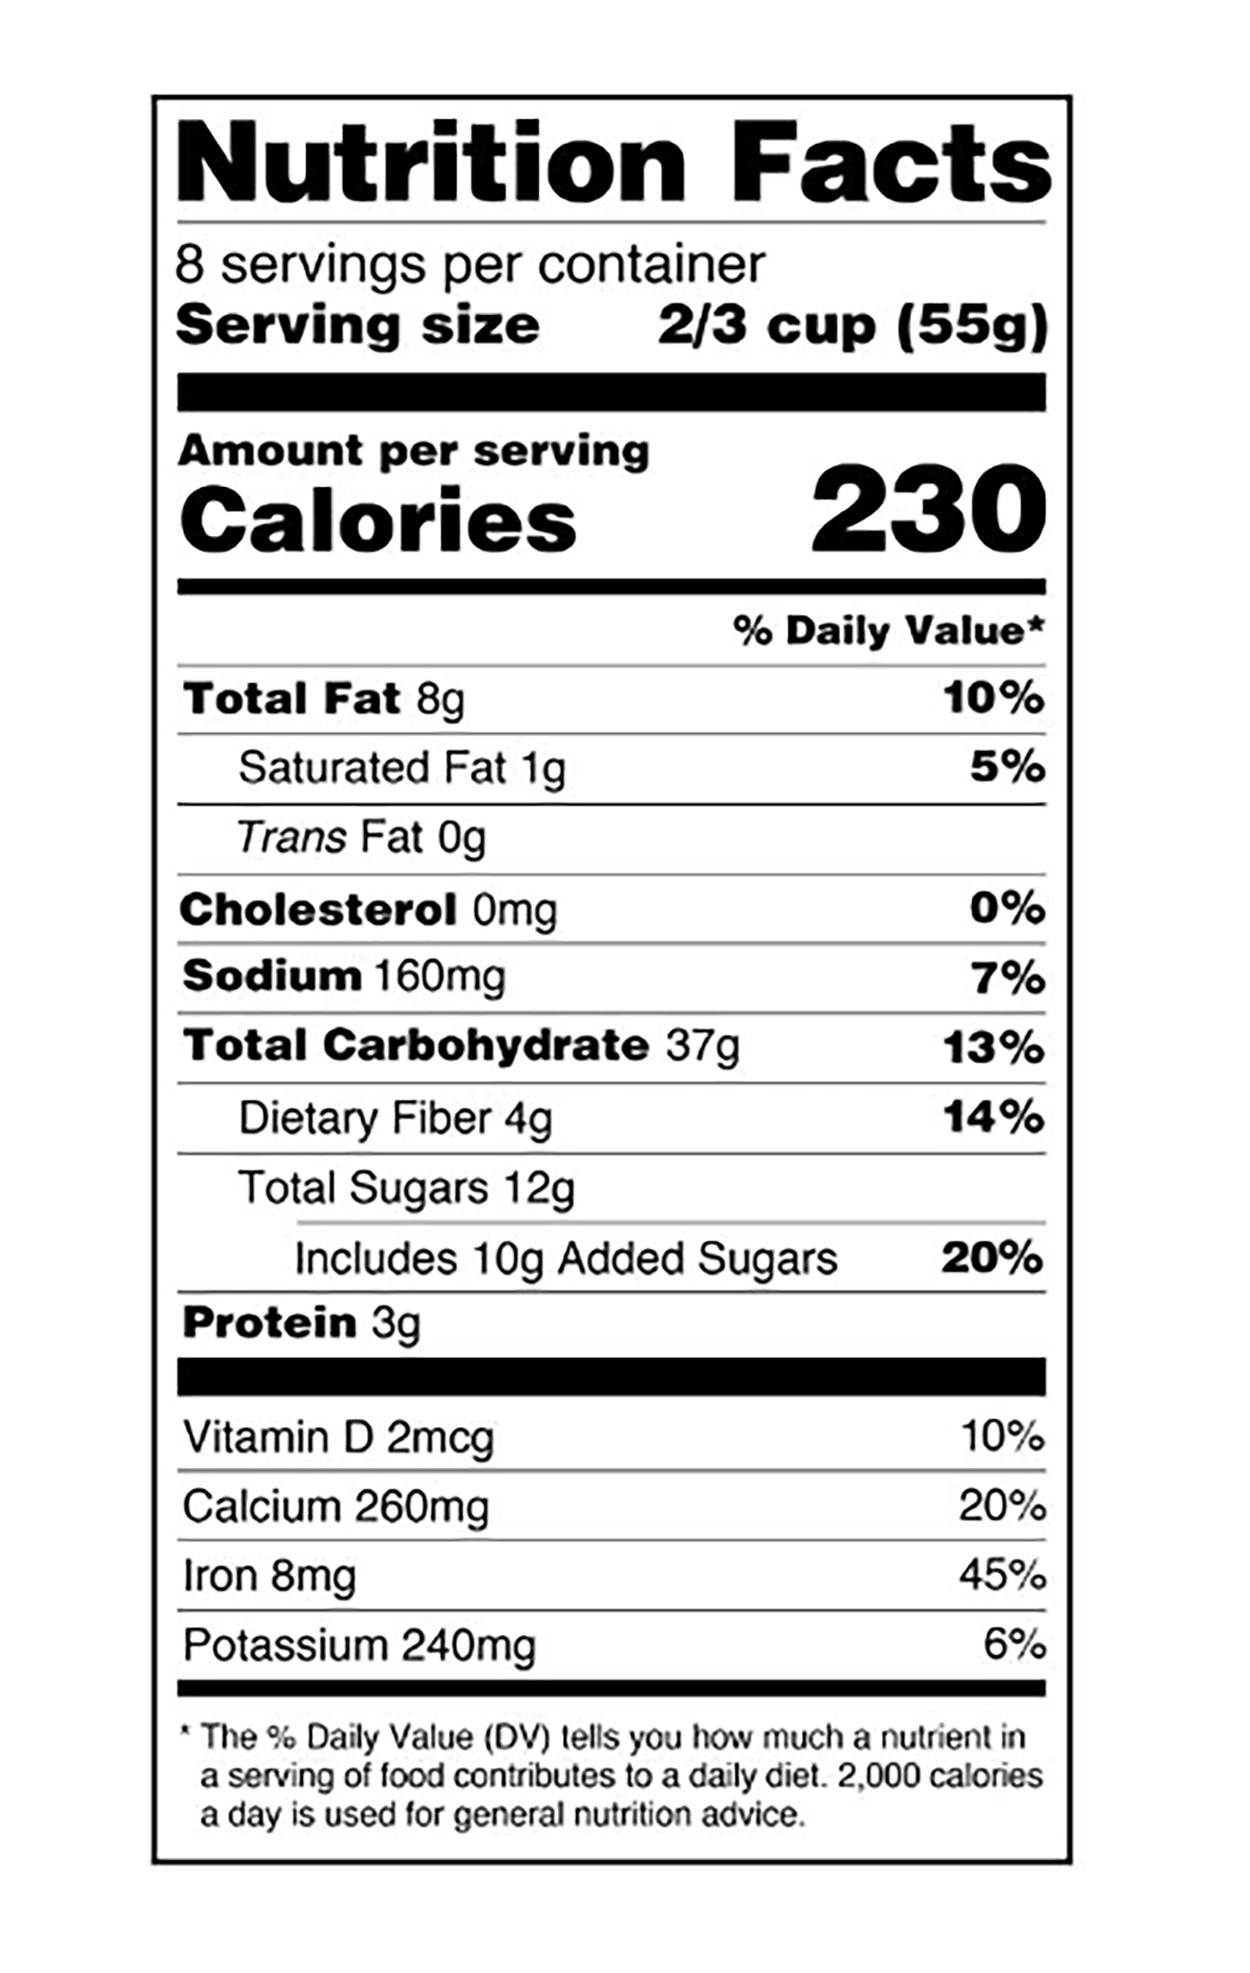 Nutrition facts label.